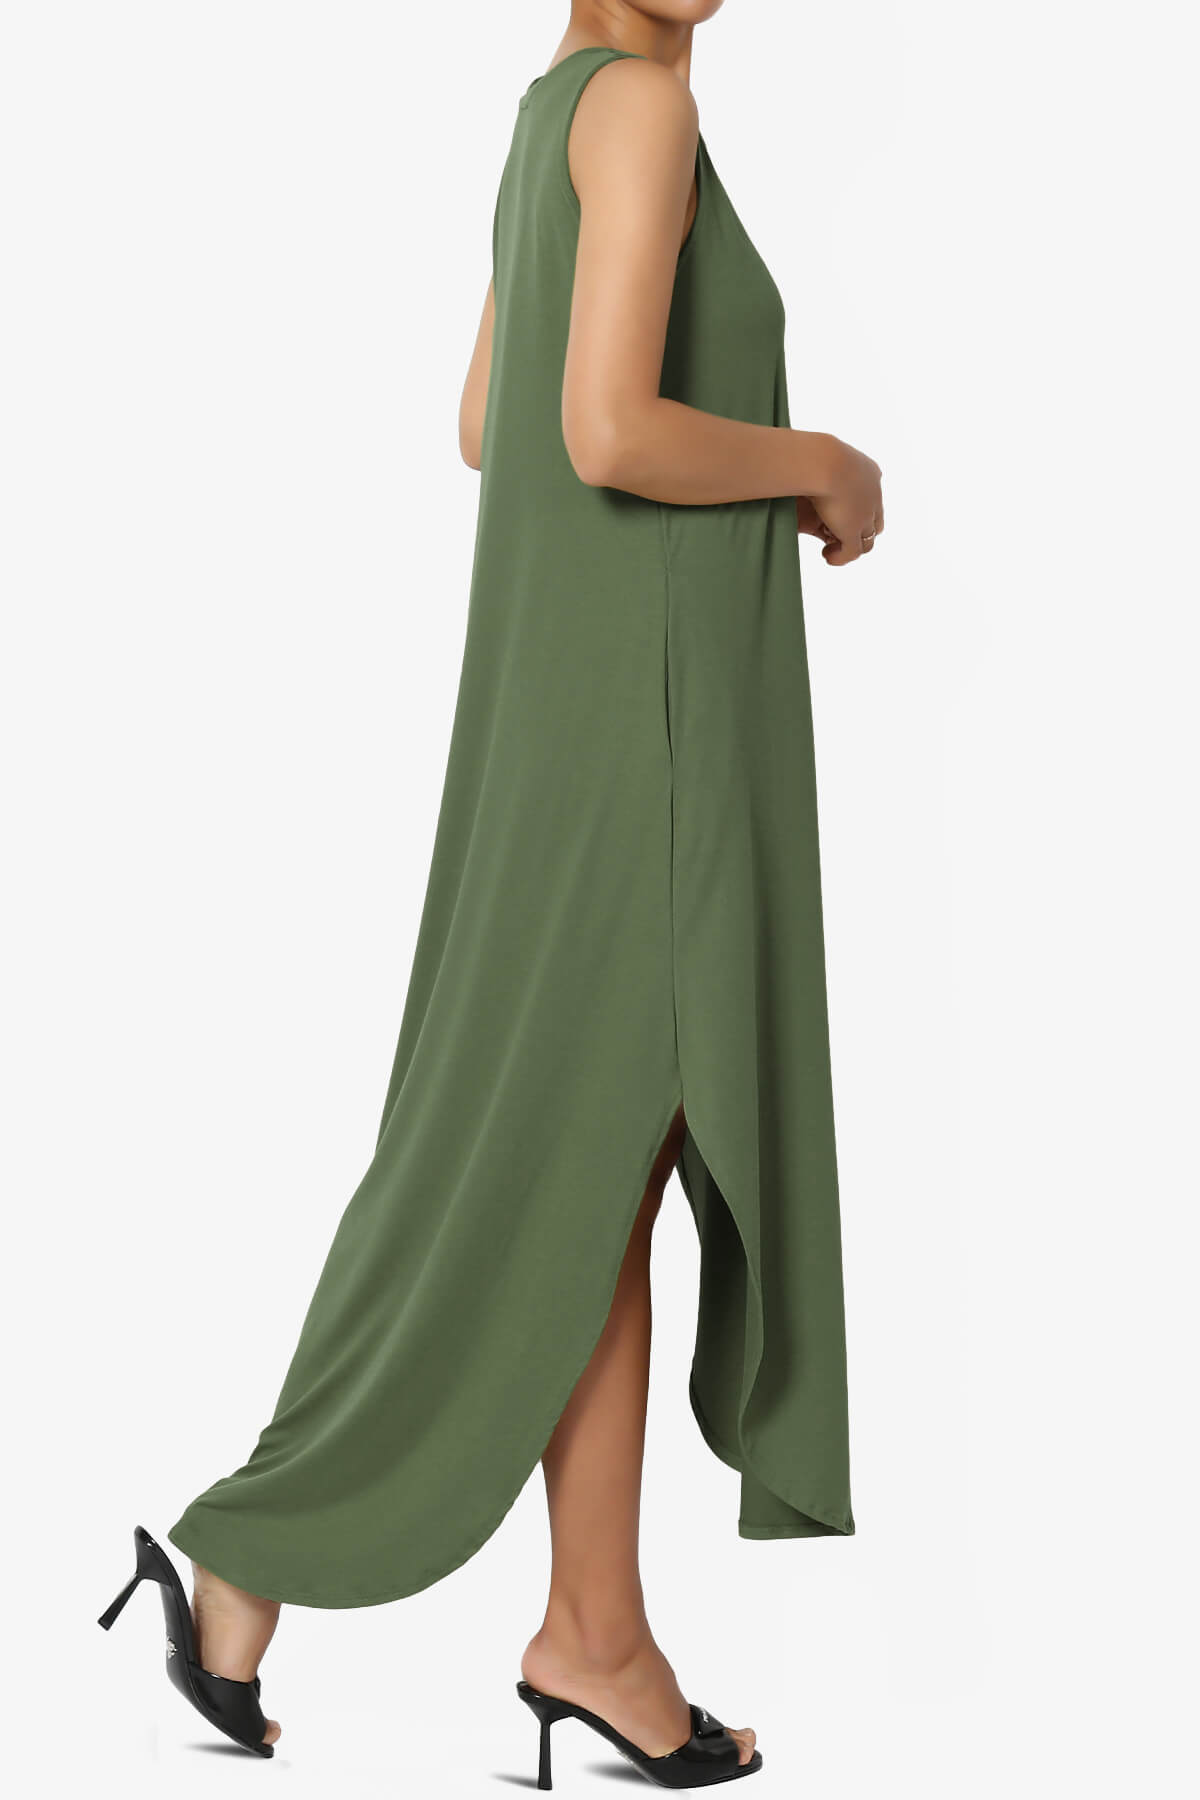 Load image into Gallery viewer, Rozlyn Sleeveless Slit Maxi Dress DUSTY OLIVE_4
